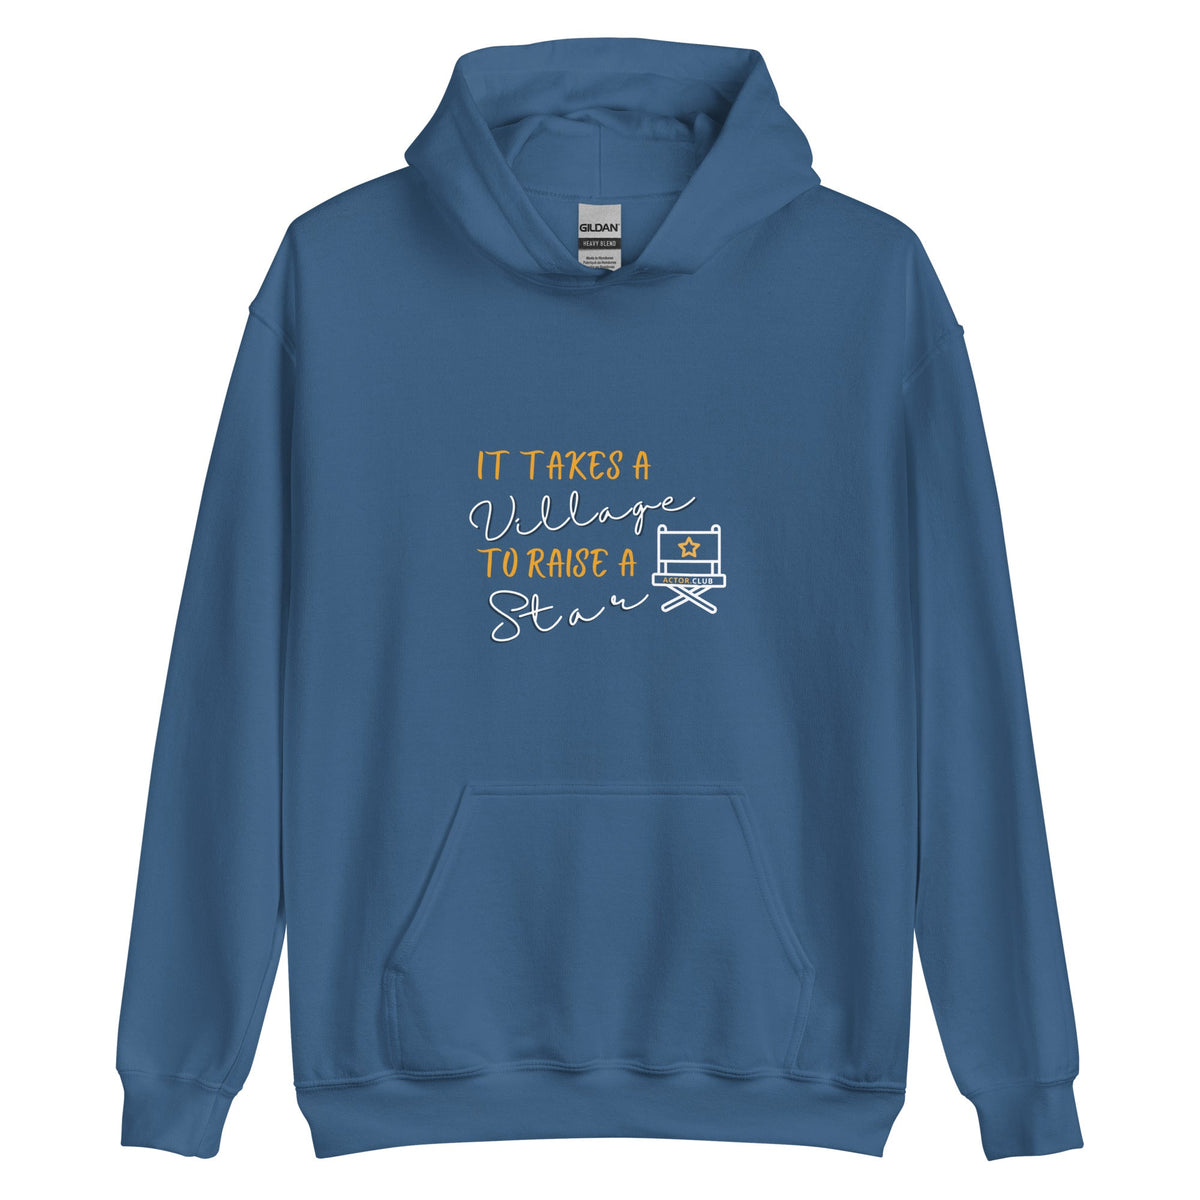 IT TAKES A VILLAGE TO RAISE A STAR - Inspirational Women's Entertainment Hoodie | I Am Enough Collection